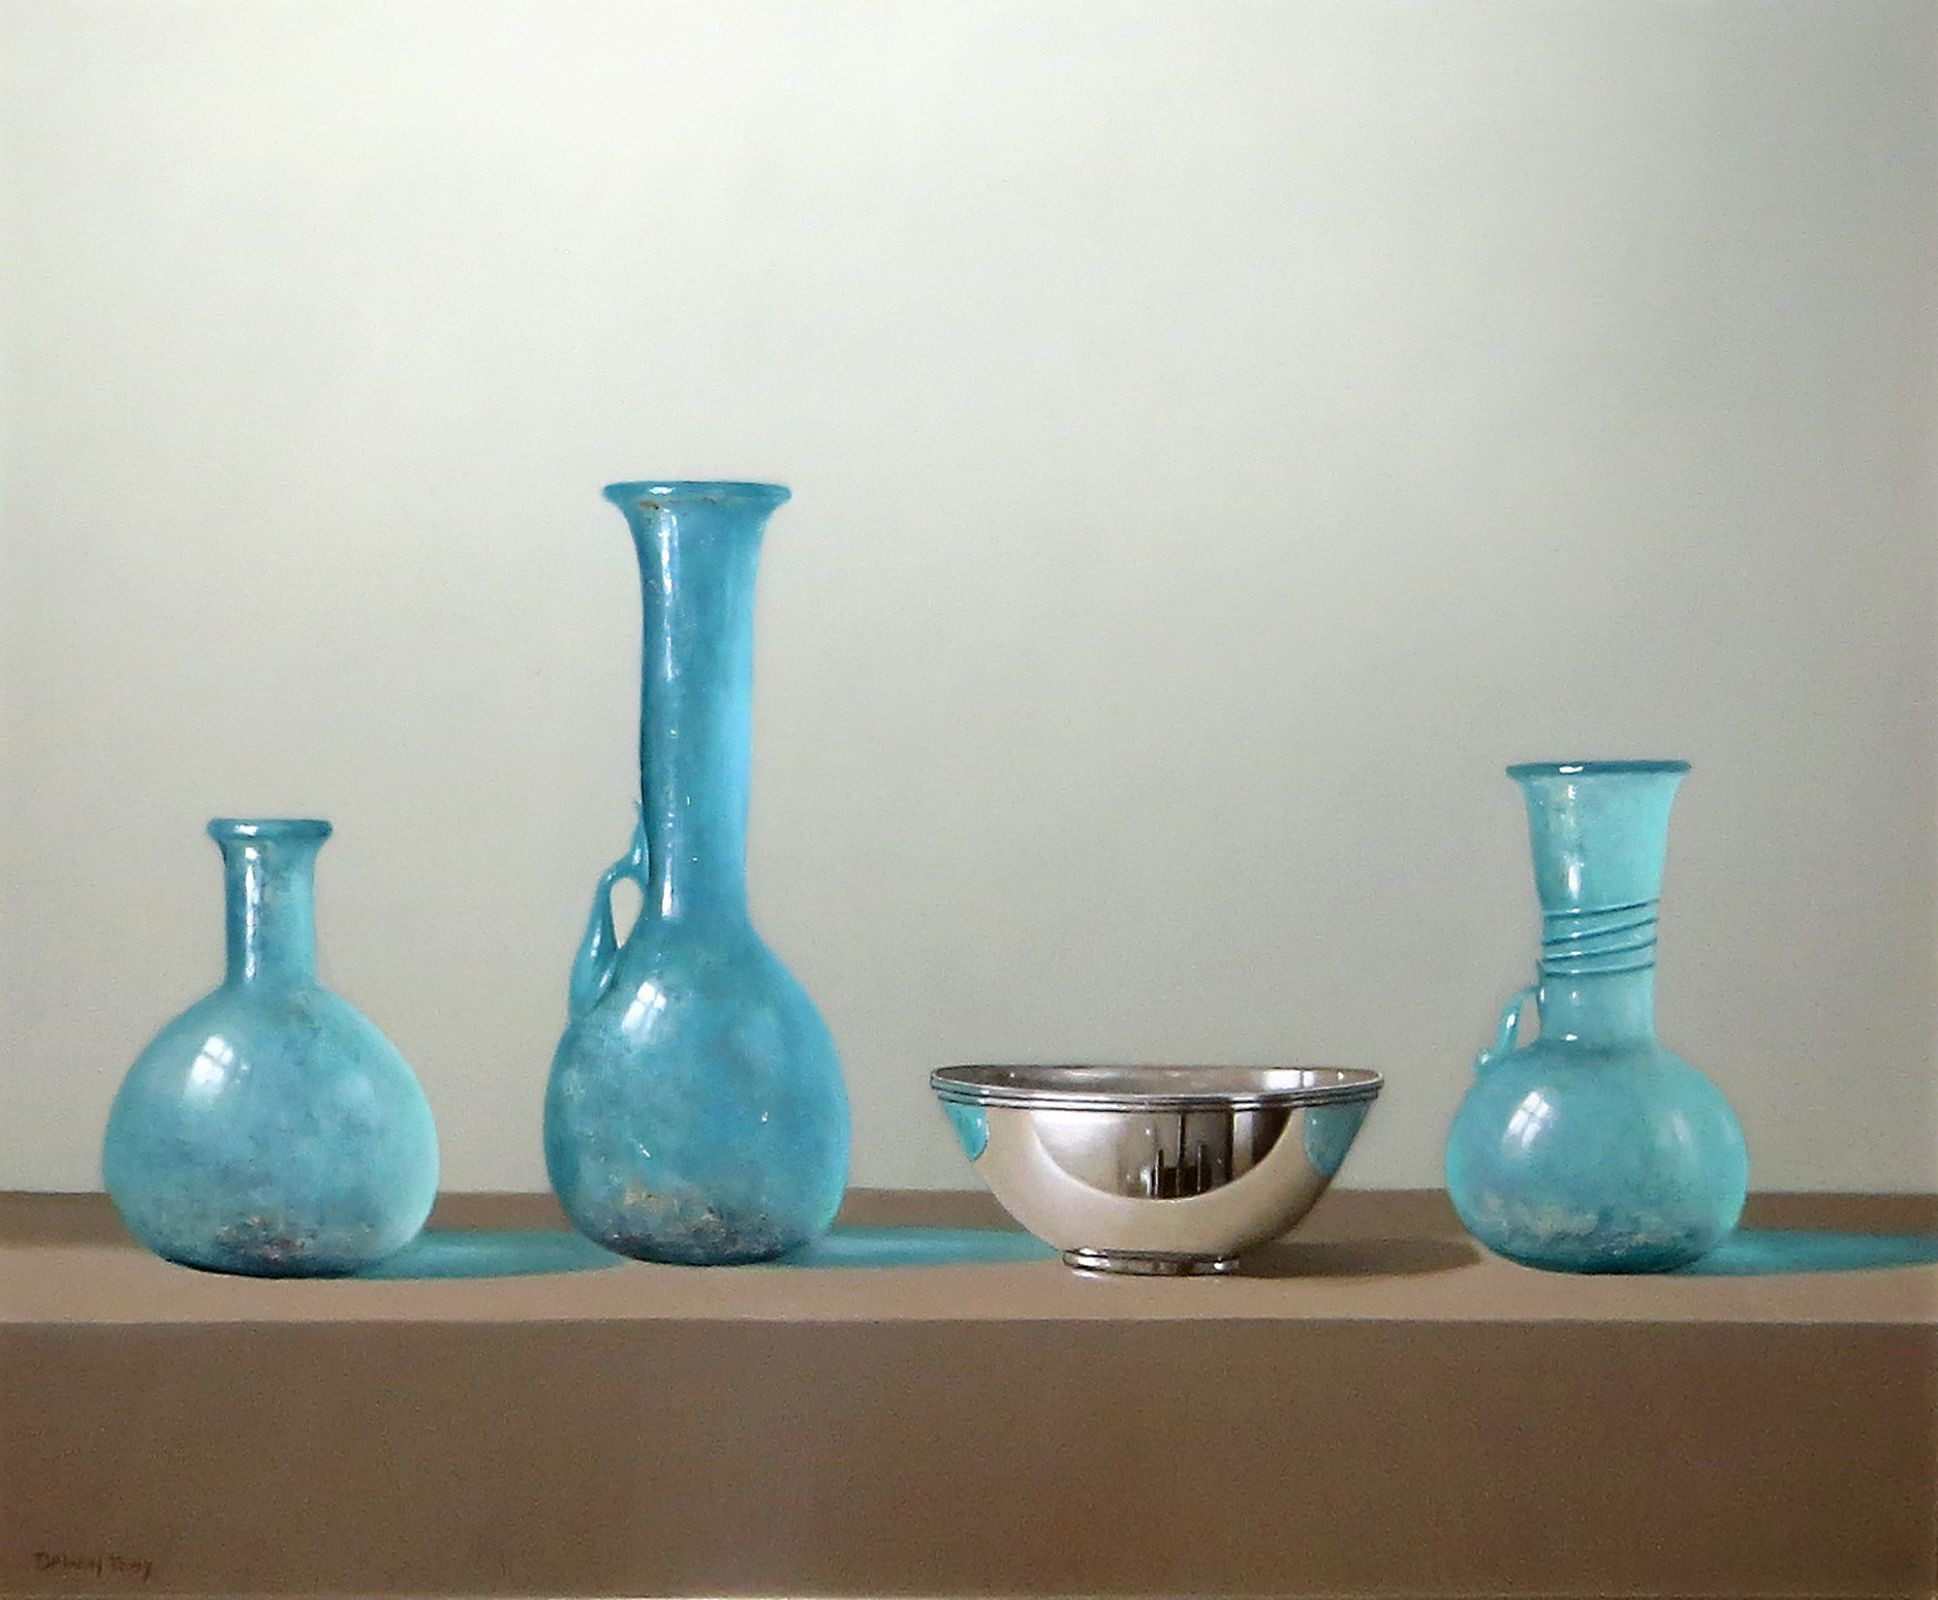 23 Lovable Tiffany Vases for Sale 2023 free download tiffany vases for sale of fenton blue glass vase unique download wallpaper blue glass vases with fenton blue glass vase unique download wallpaper blue glass vases for sale